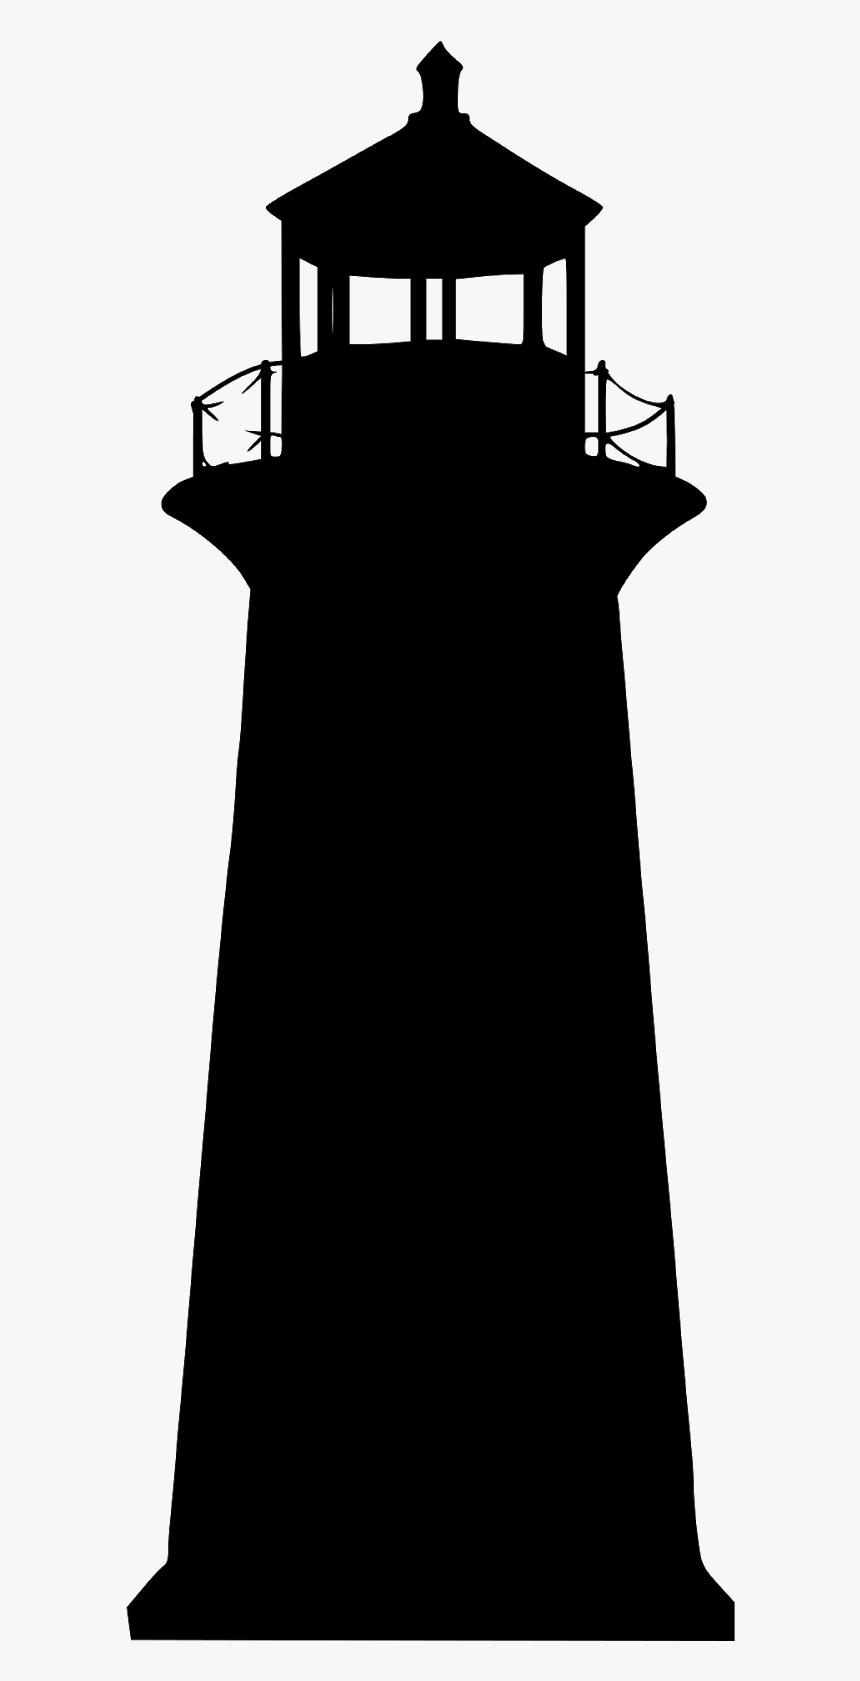 Download Lighthouse, Building, Silhouette, Beach, Direction ...